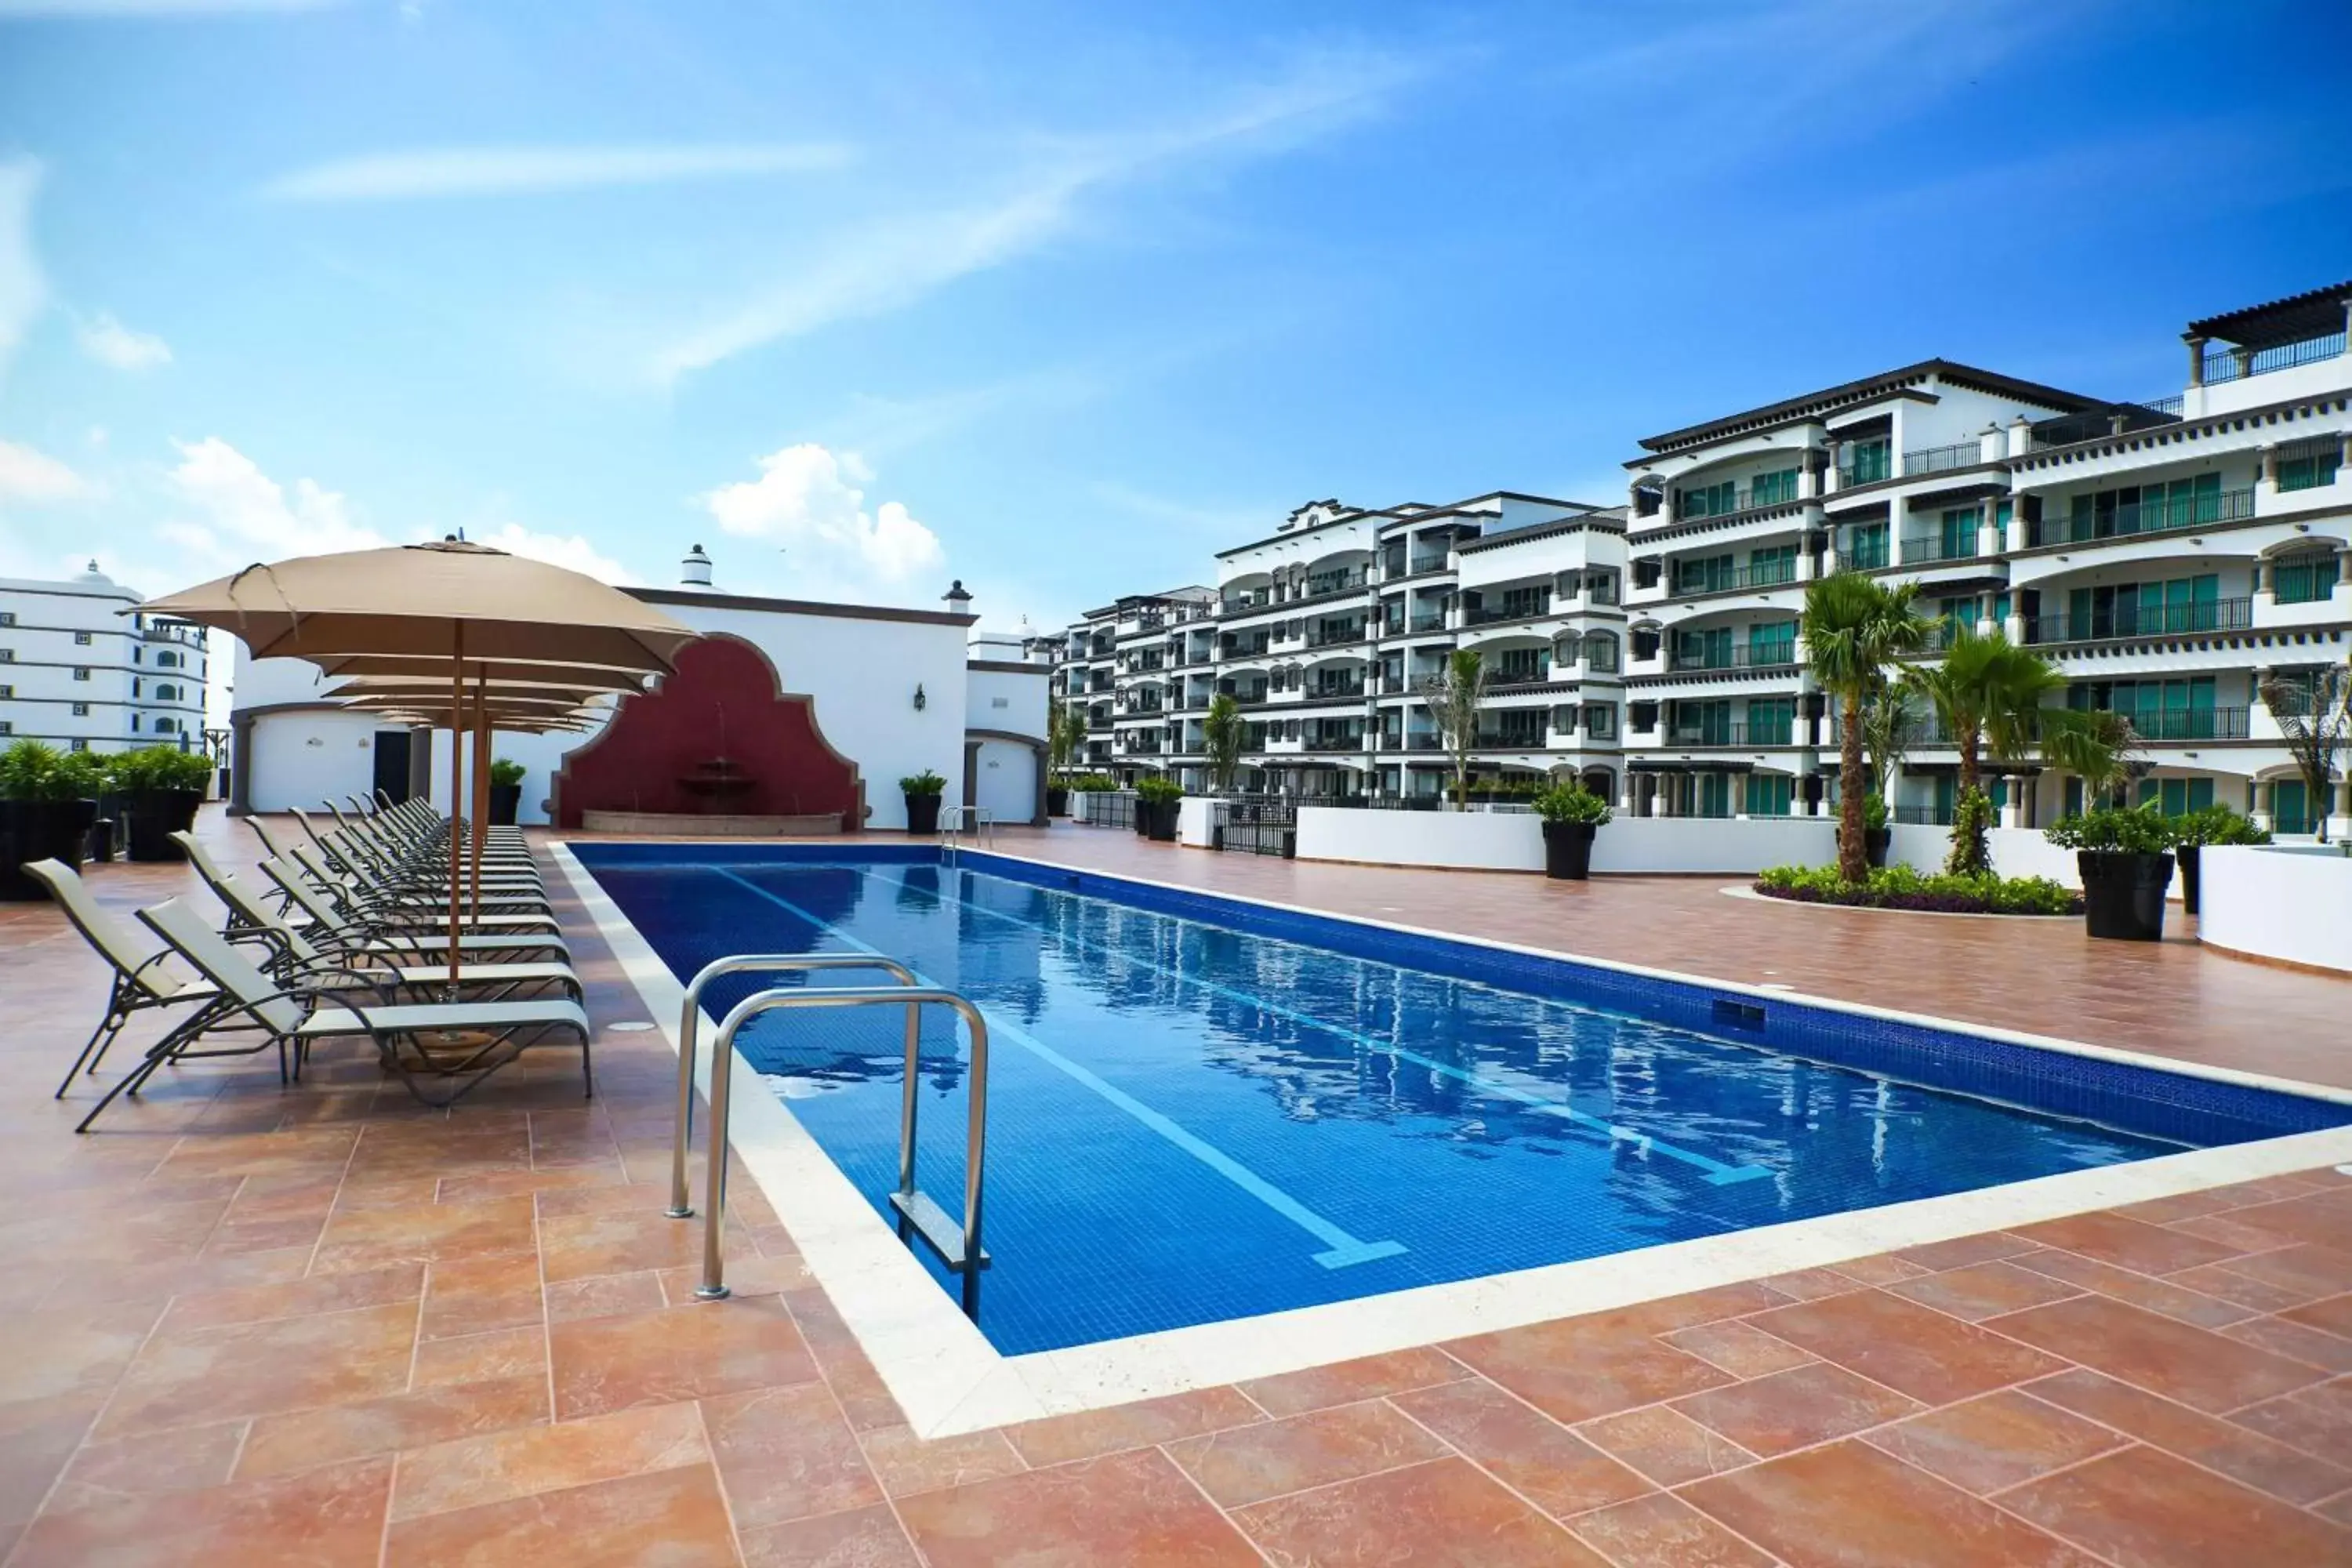 Activities, Swimming Pool in Grand Residences Riviera Cancun, All Inclusive